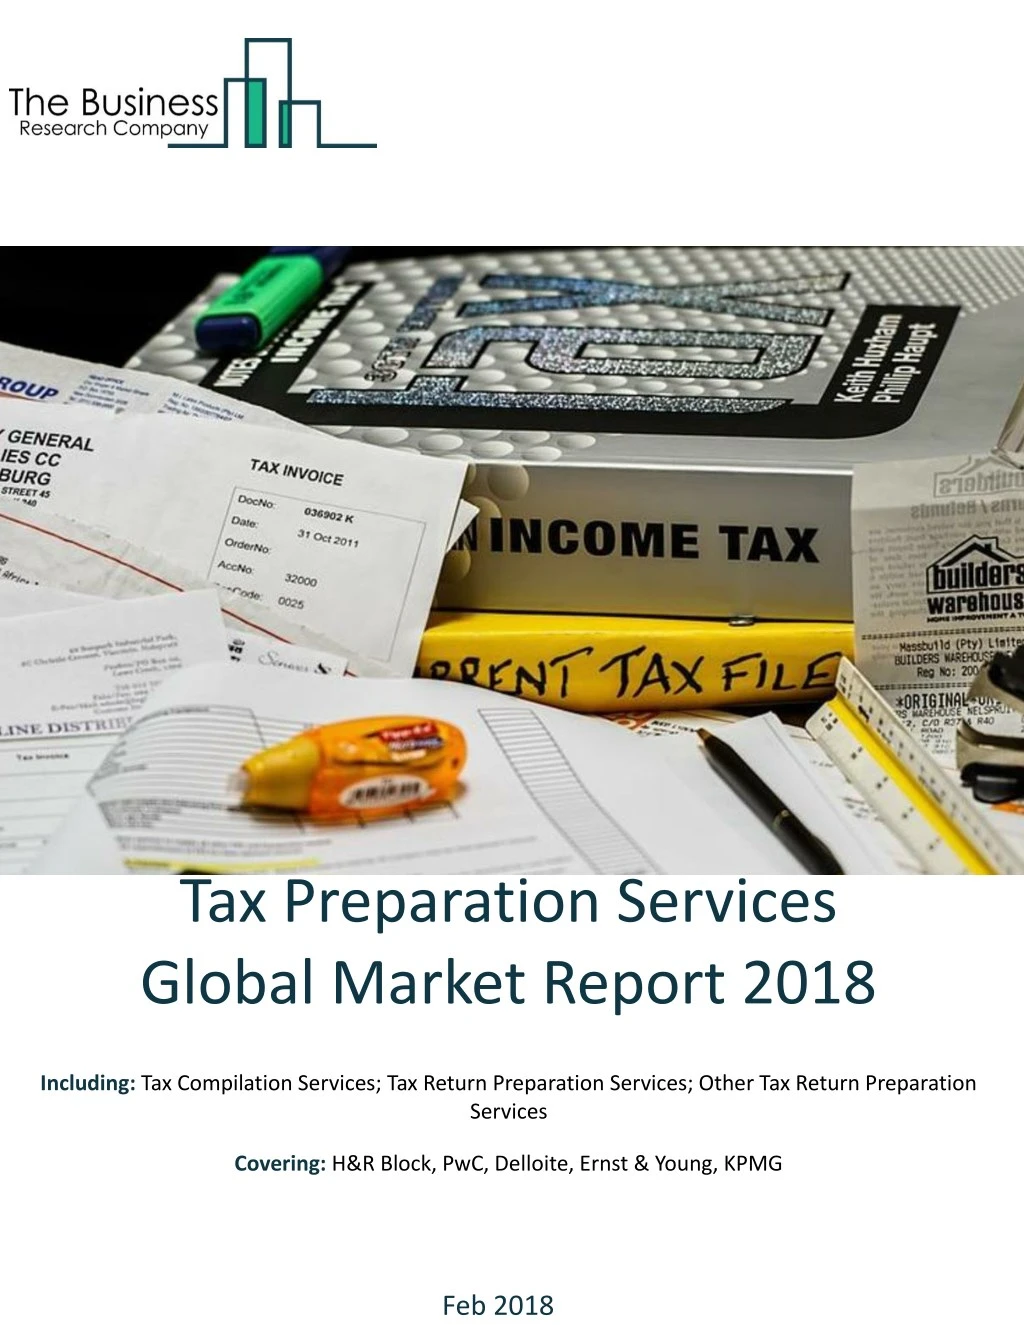 tax preparation services global market report 2018